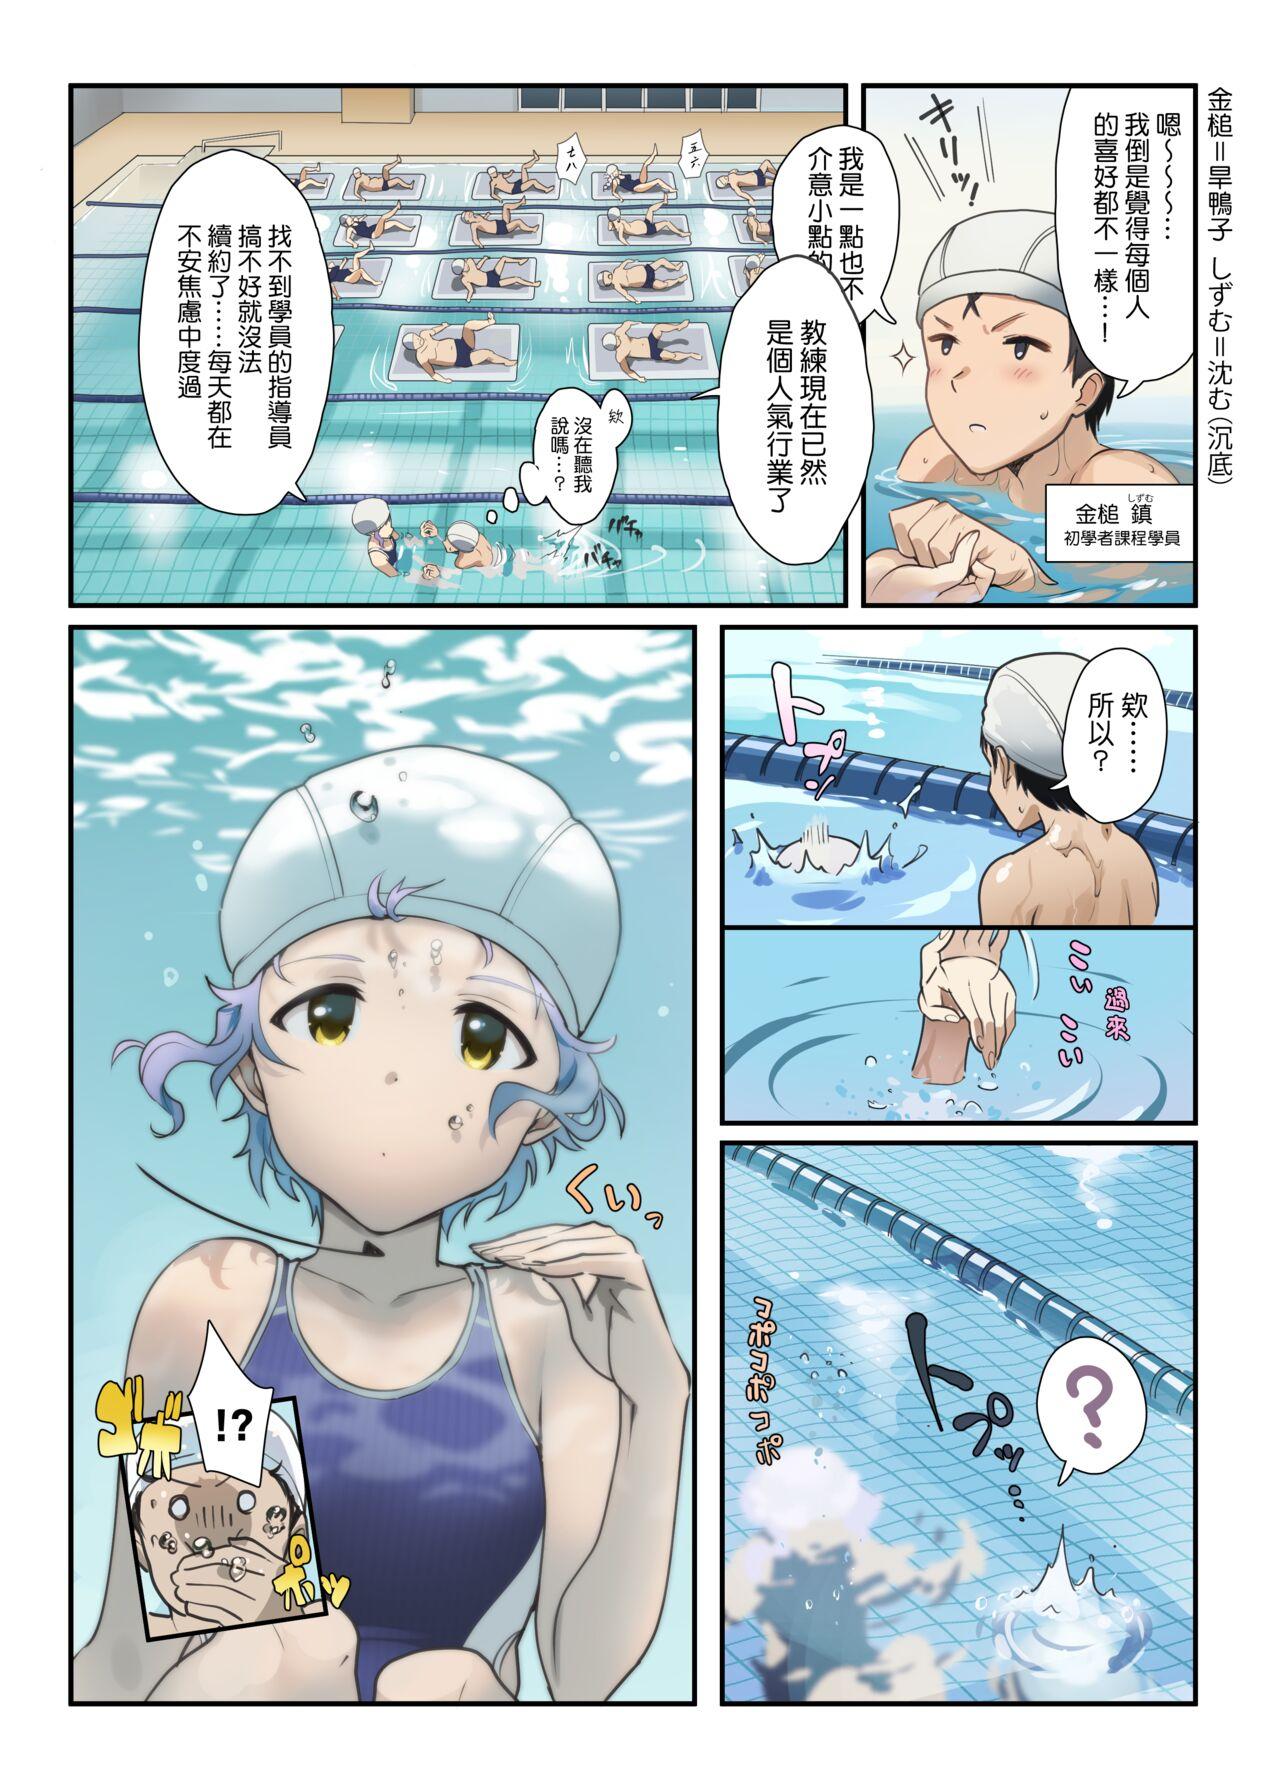 Police Oshigoto Theater 11 - The idolmaster Ass Fuck - Page 4